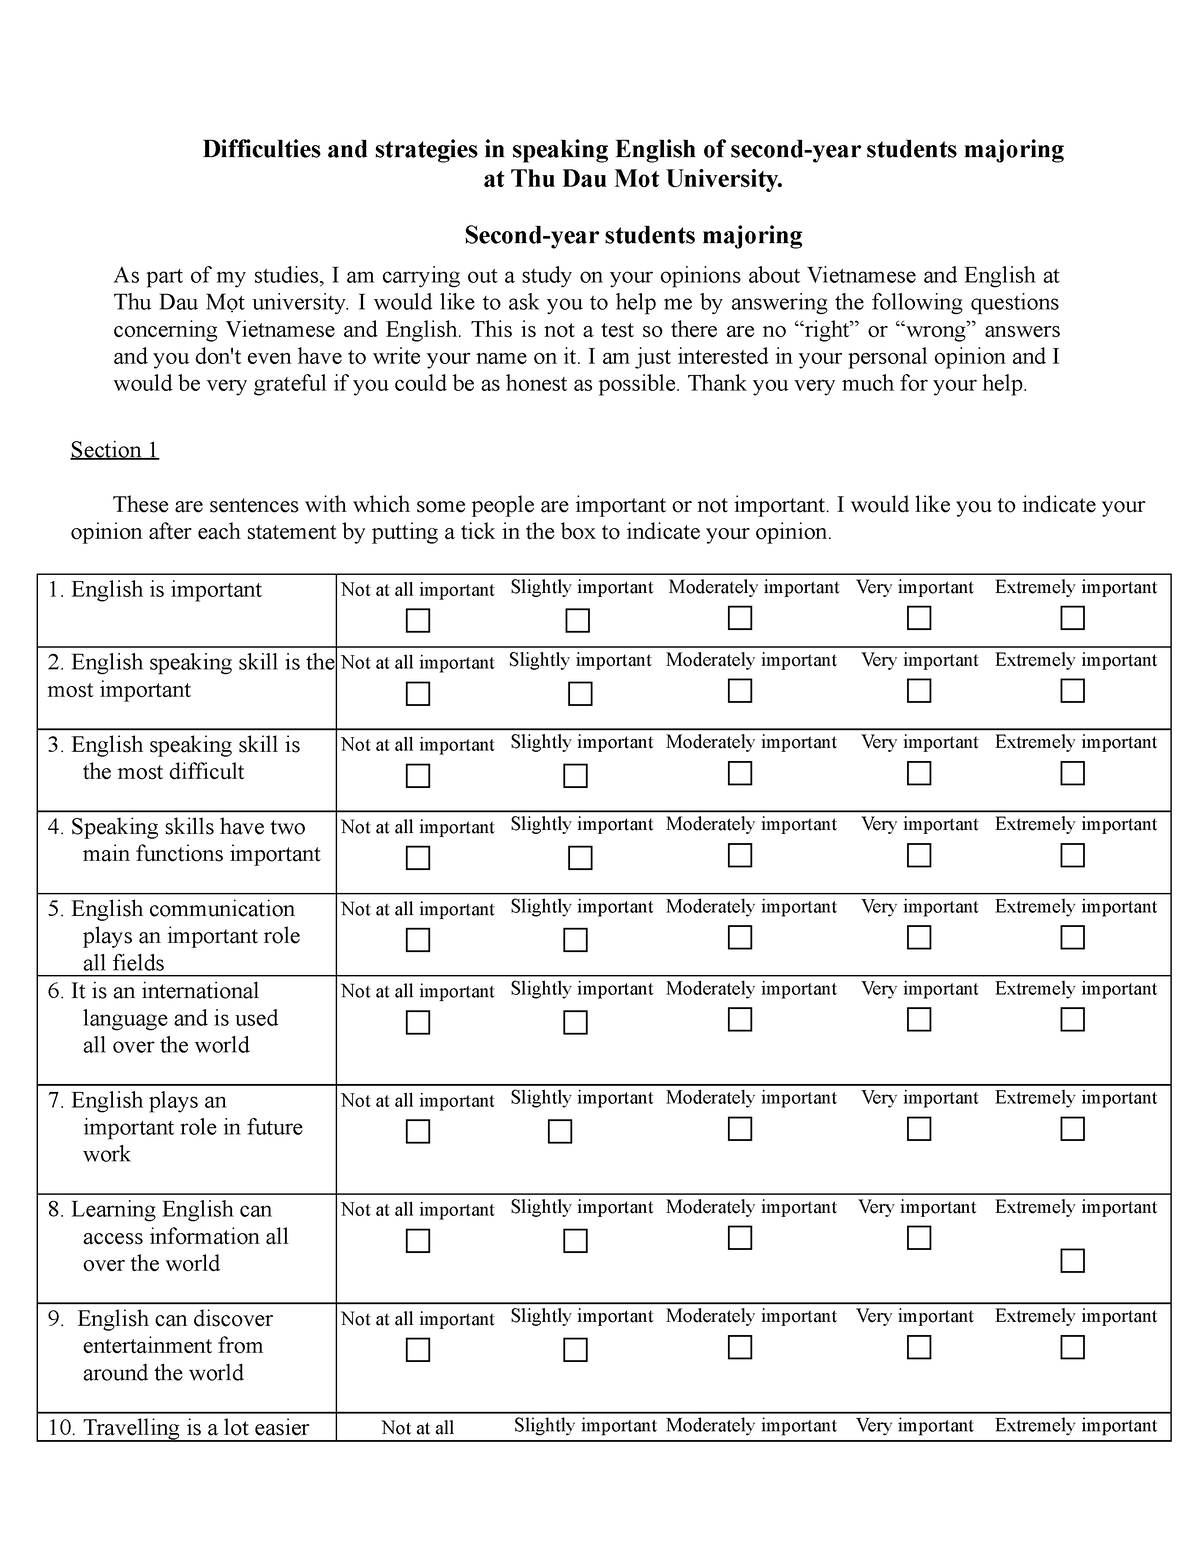 thesis questionnaire about speaking skill